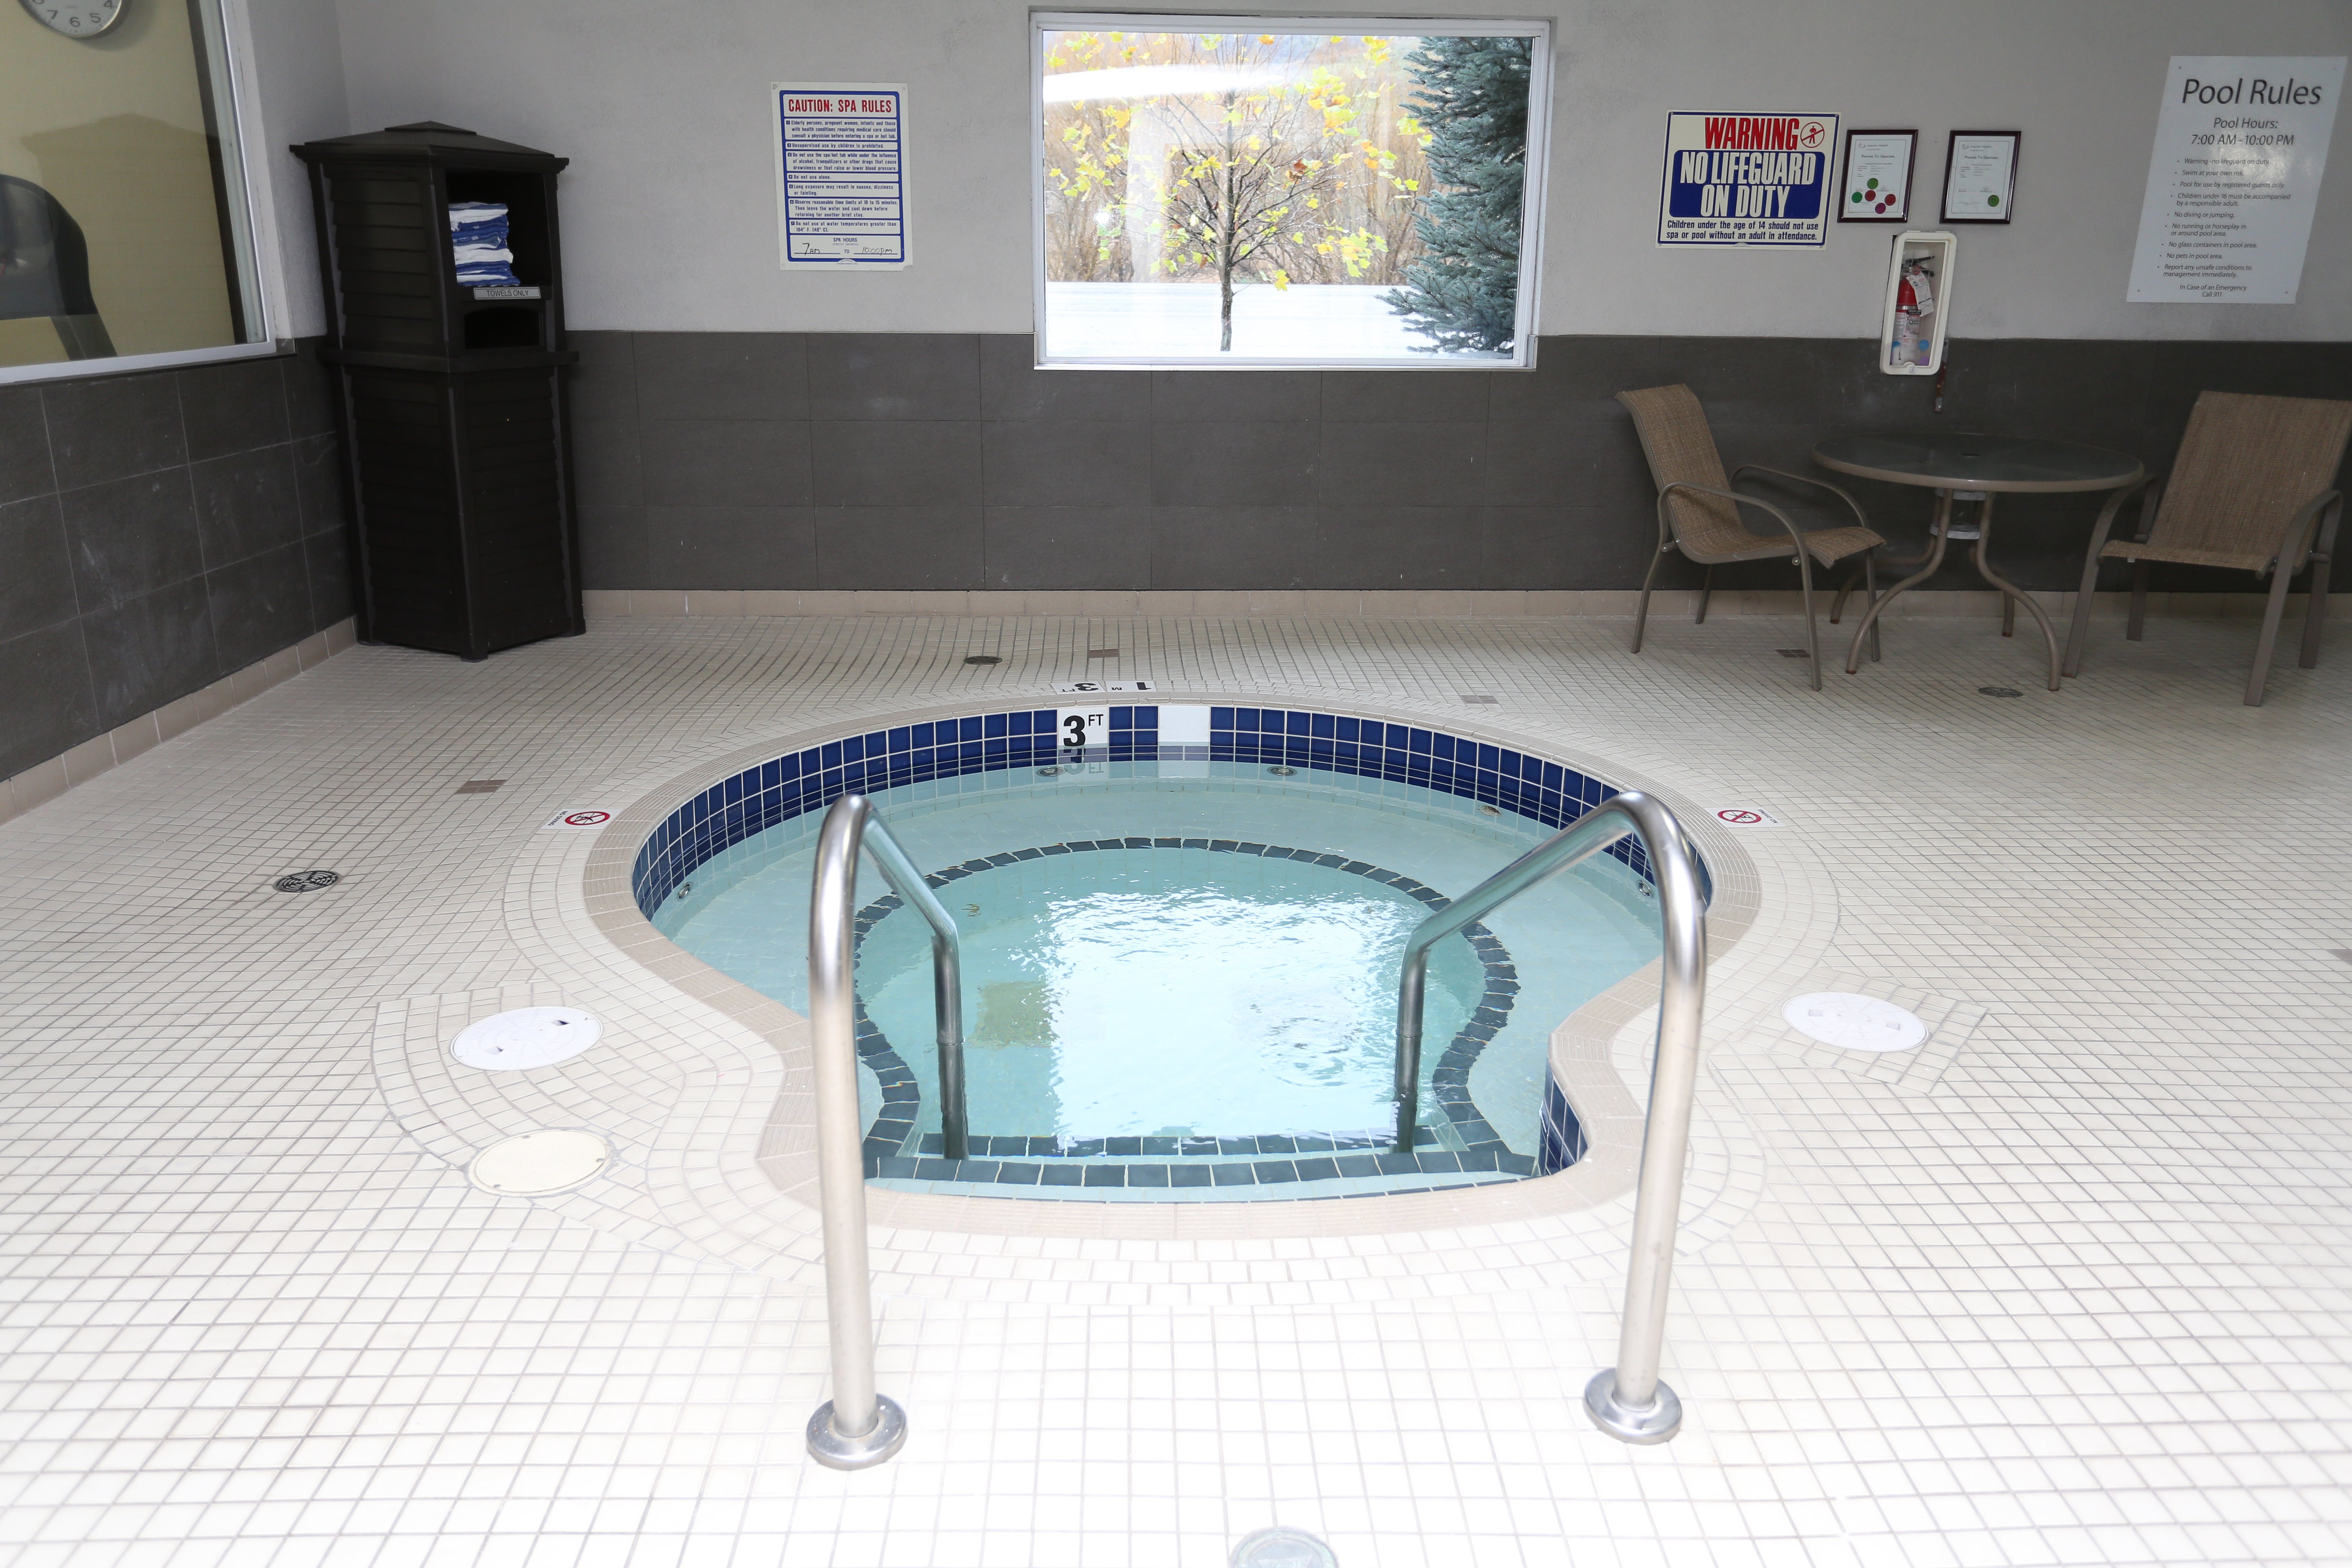 Our whirlpool is located in the pool area